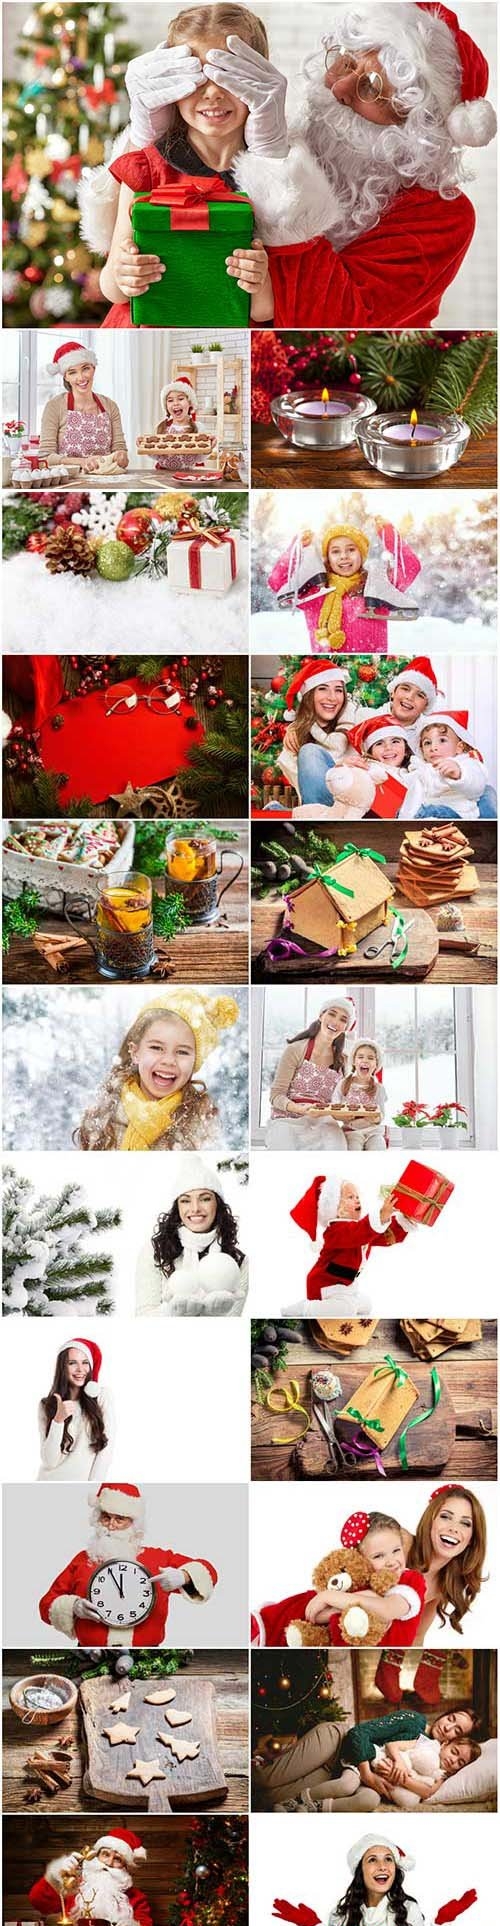 New Year and Christmas stock photos 96